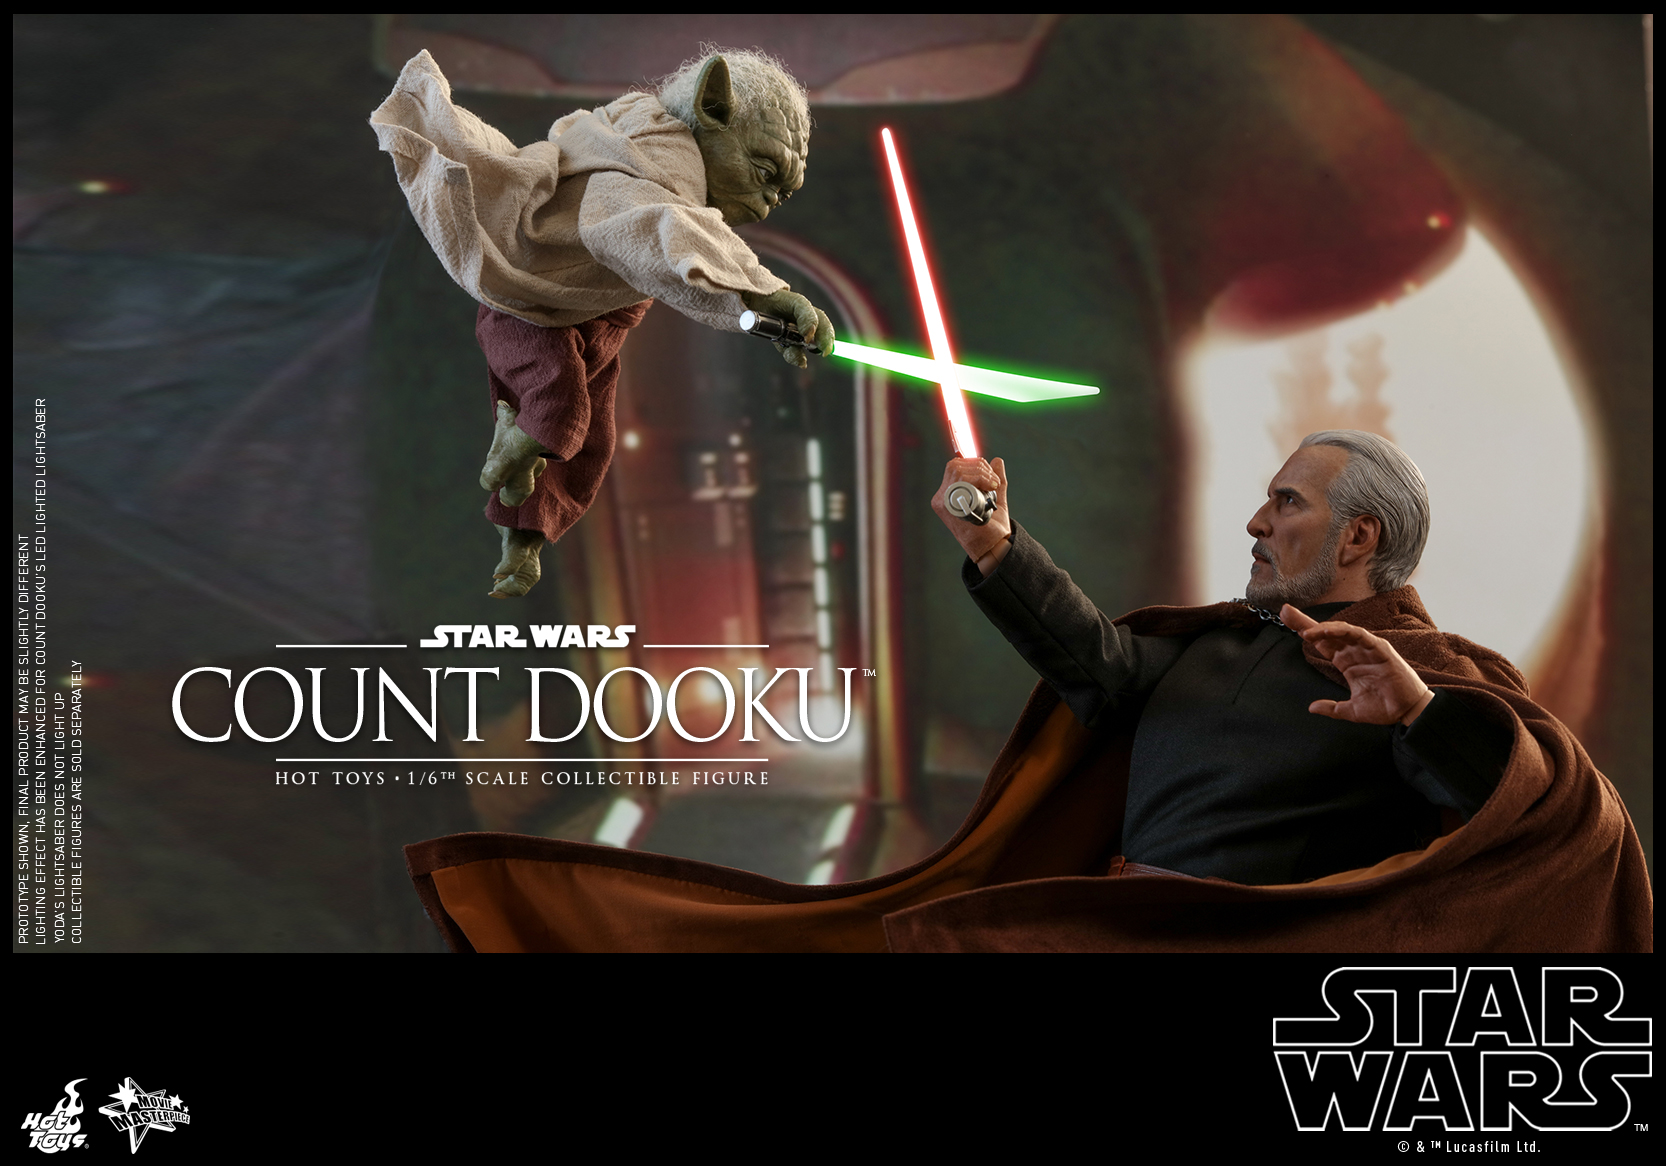 Hot Toys - Star Wars Episode II Attack of the Clones - Count Dooku Collectible Figure_PR10